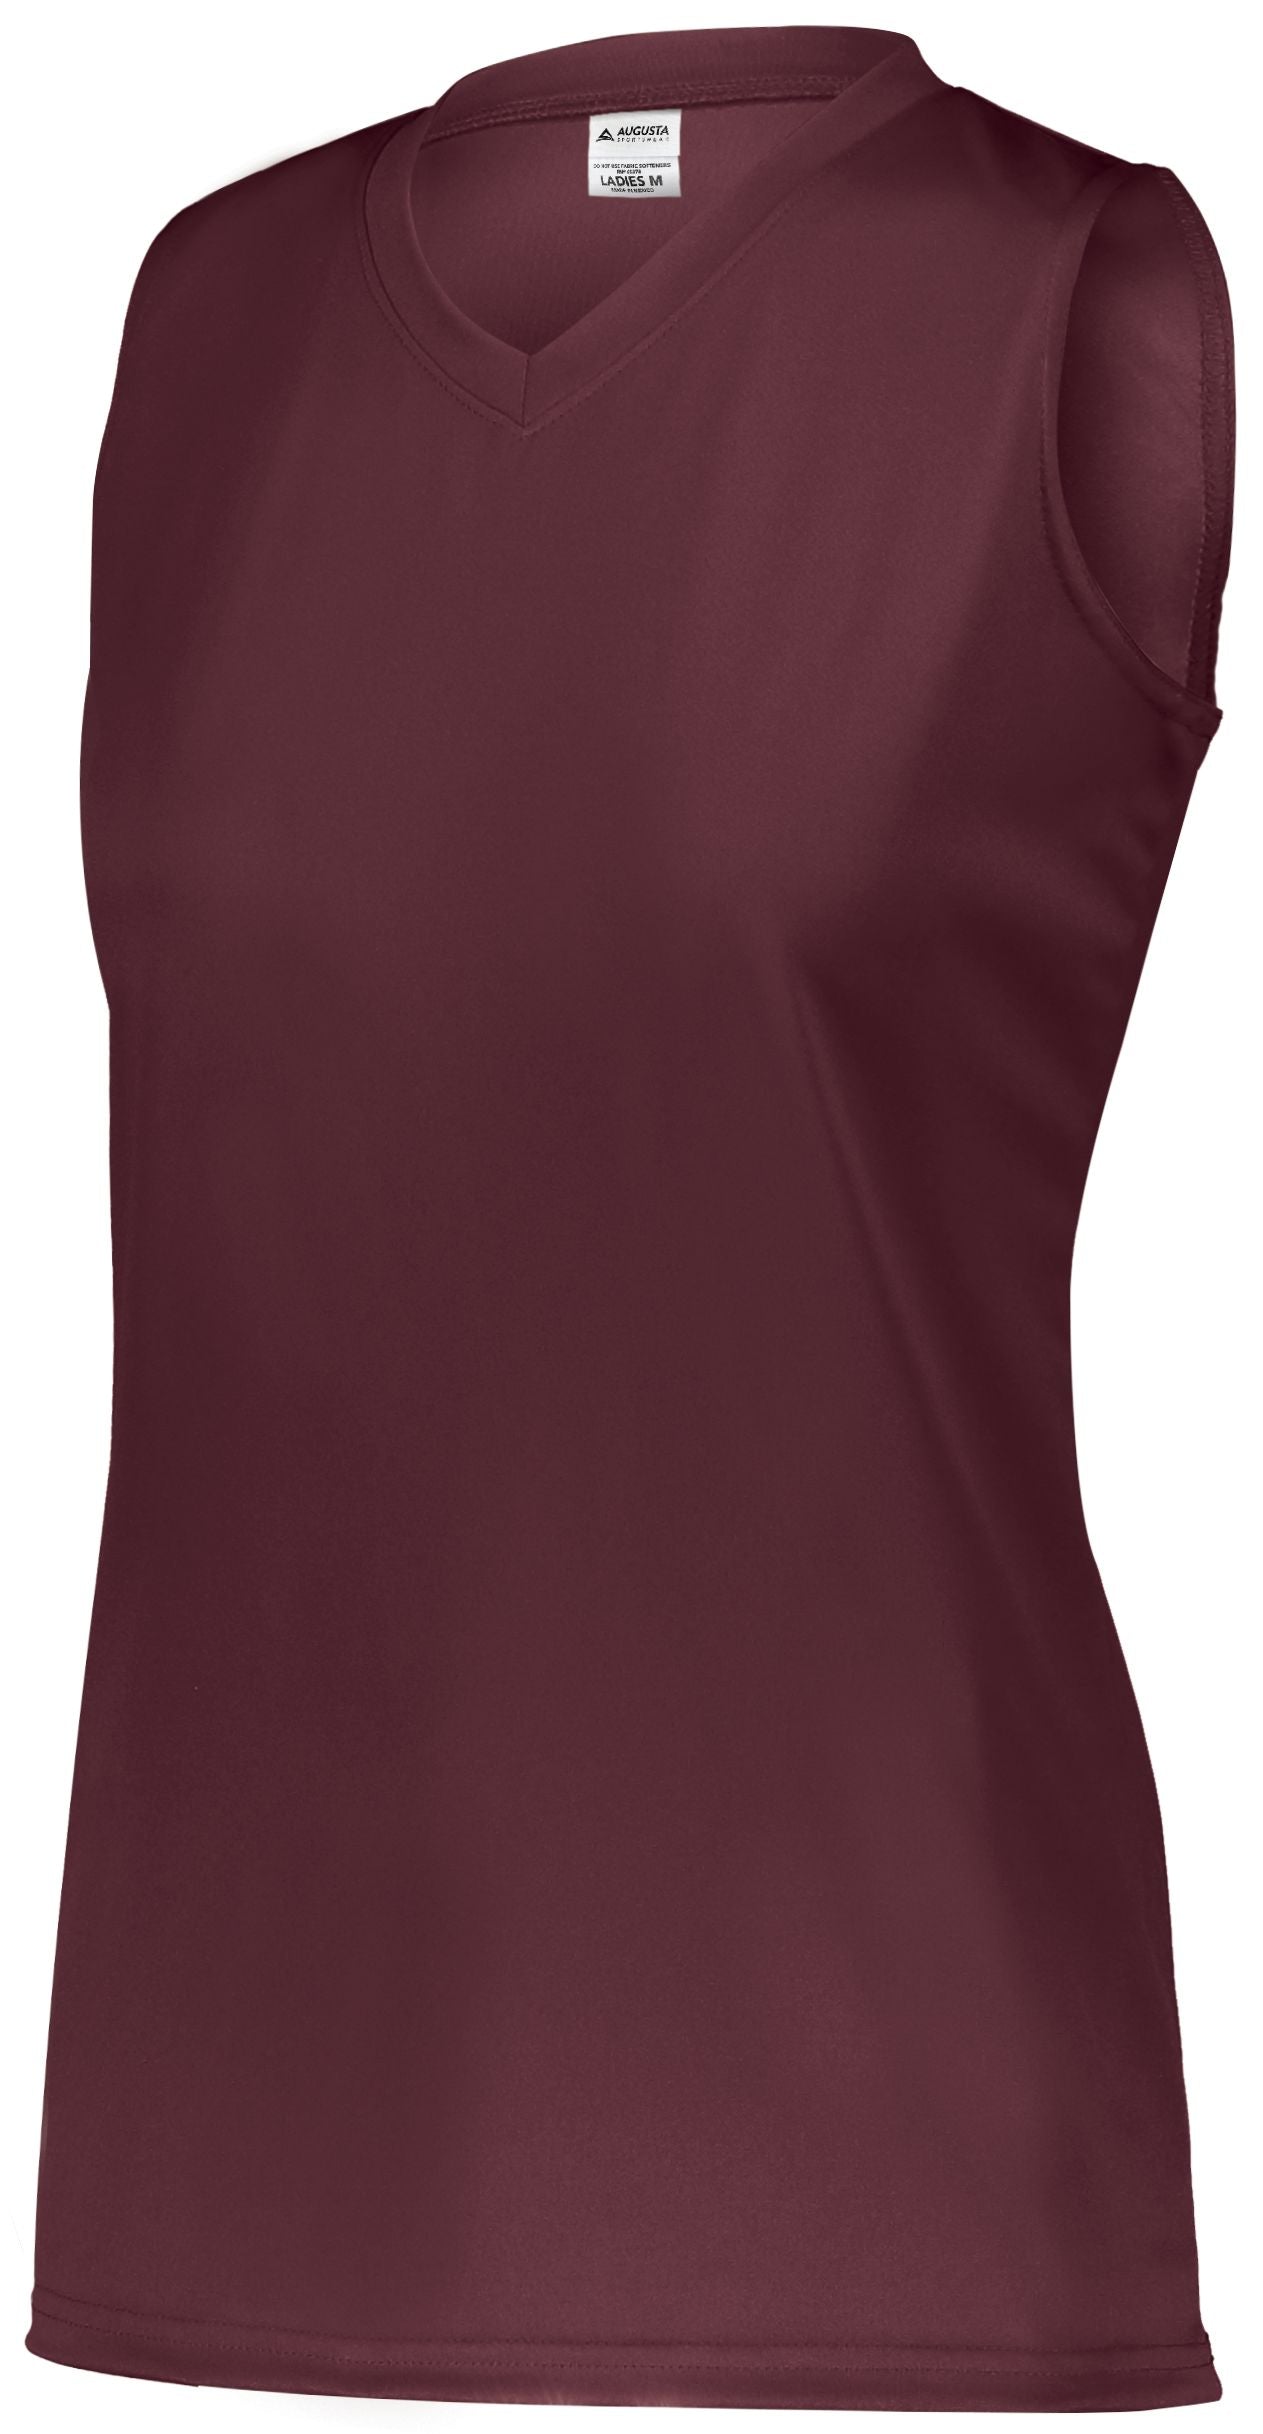 Augusta Sportswear Ladies Attain Wicking Sleeveless Jersey in Maroon (Hlw)  -Part of the Ladies, Ladies-Jersey, Augusta-Products, Softball, Shirts product lines at KanaleyCreations.com